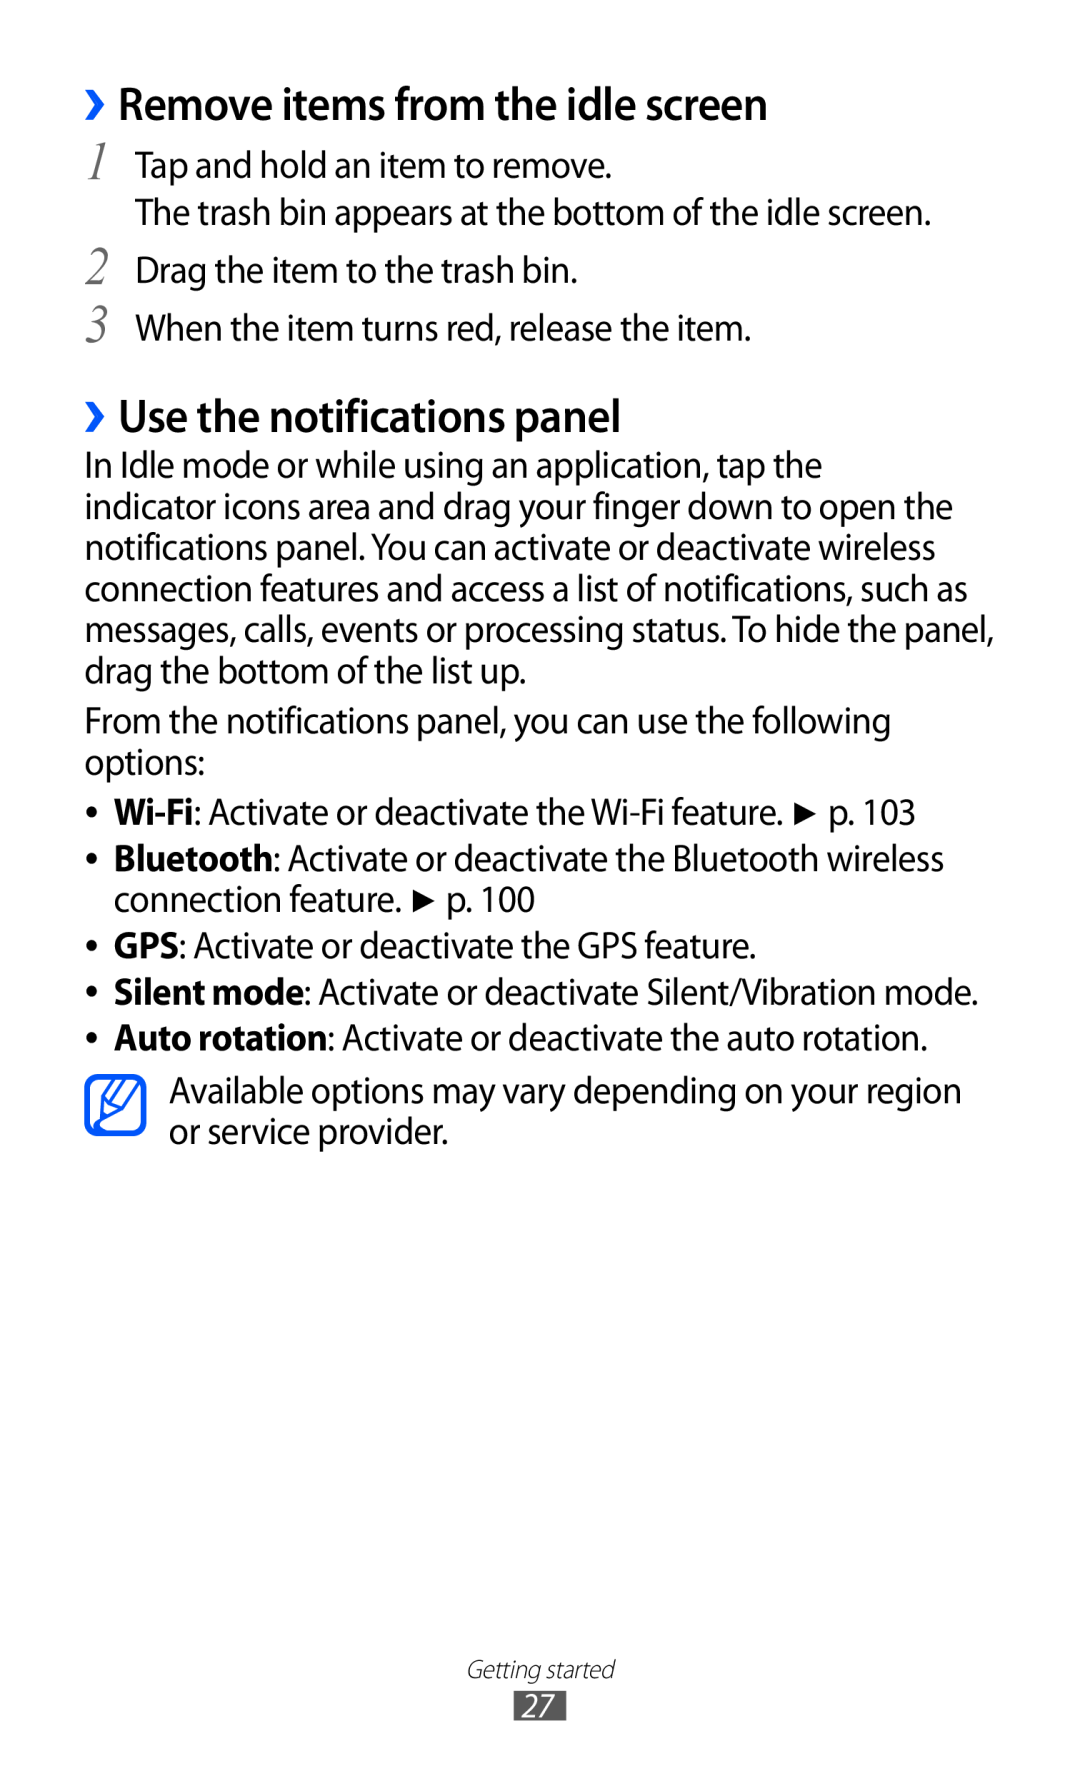 Samsung GT-I9070 user manual ››Remove items from the idle screen, ››Use the notifications panel 